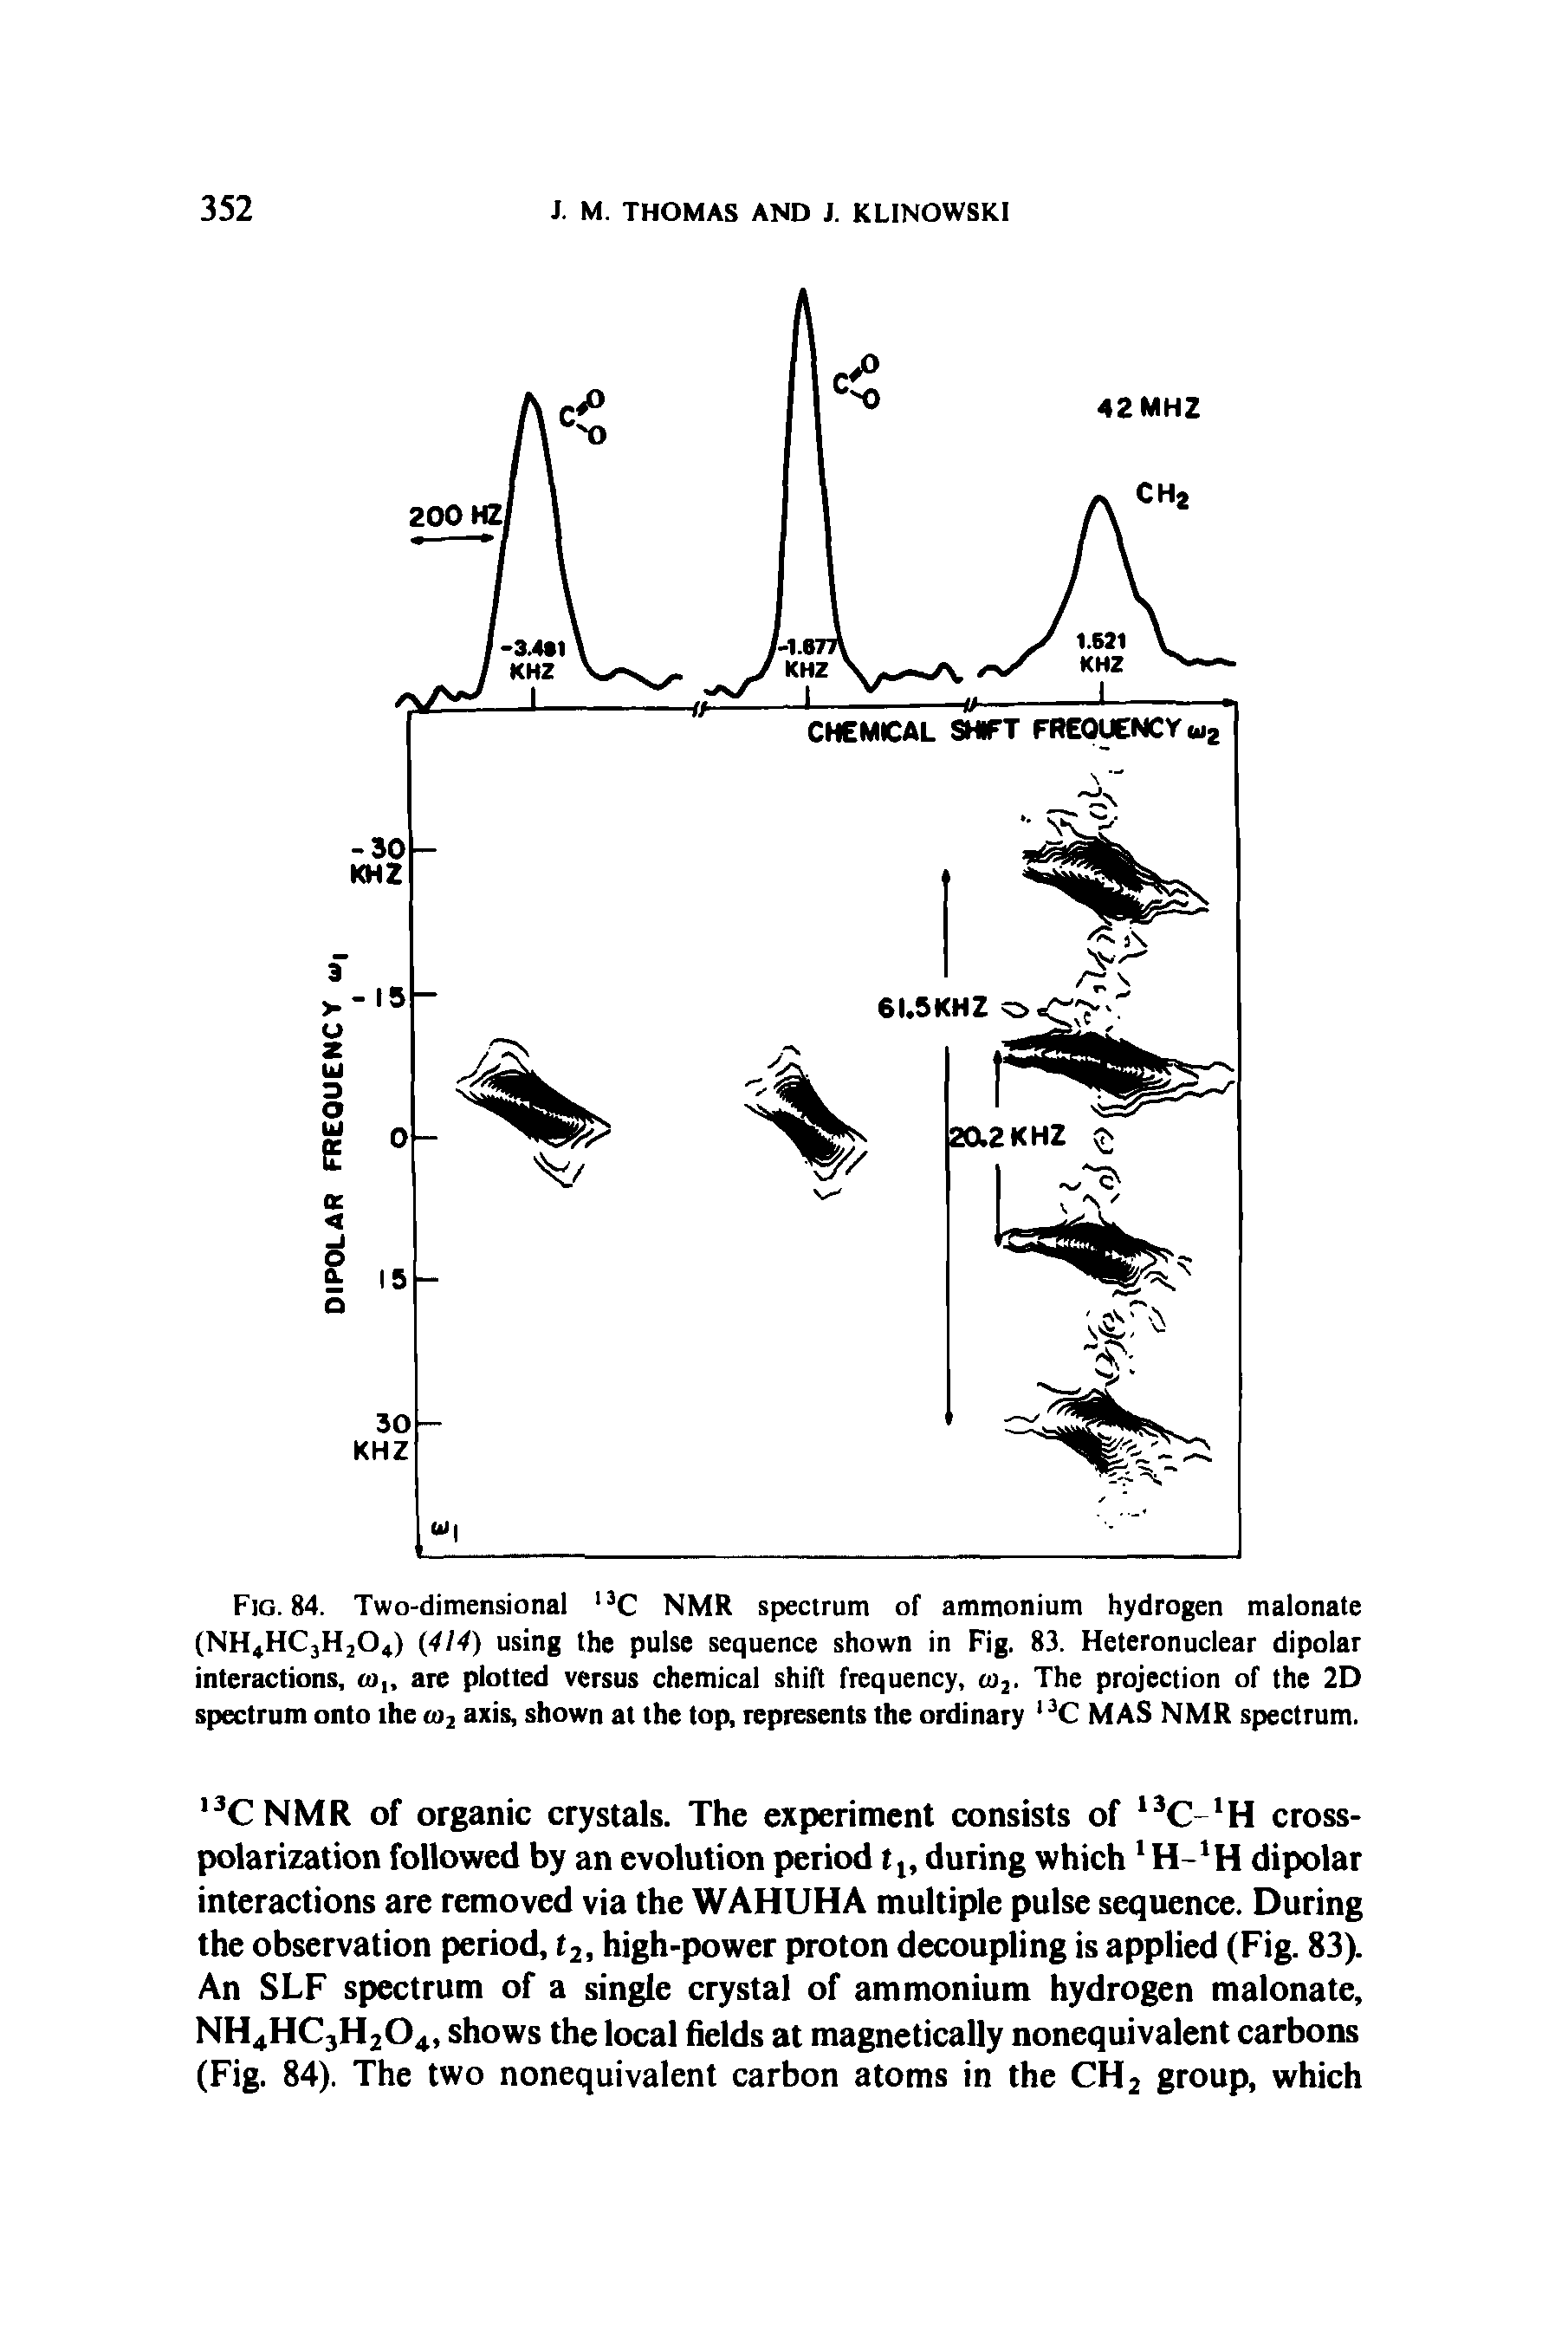 Fig. 84. Two-dimensional 13C NMR spectrum of ammonium hydrogen malonate (NH4HC3H204) (414) using the pulse sequence shown in Fig. 83. Heteronuclear dipolar interactions, to are plotted versus chemical shift frequency, to2. The projection of the 2D spectrum onto the <o2 axis, shown at the top, represents the ordinary, 3C MAS NMR spectrum.